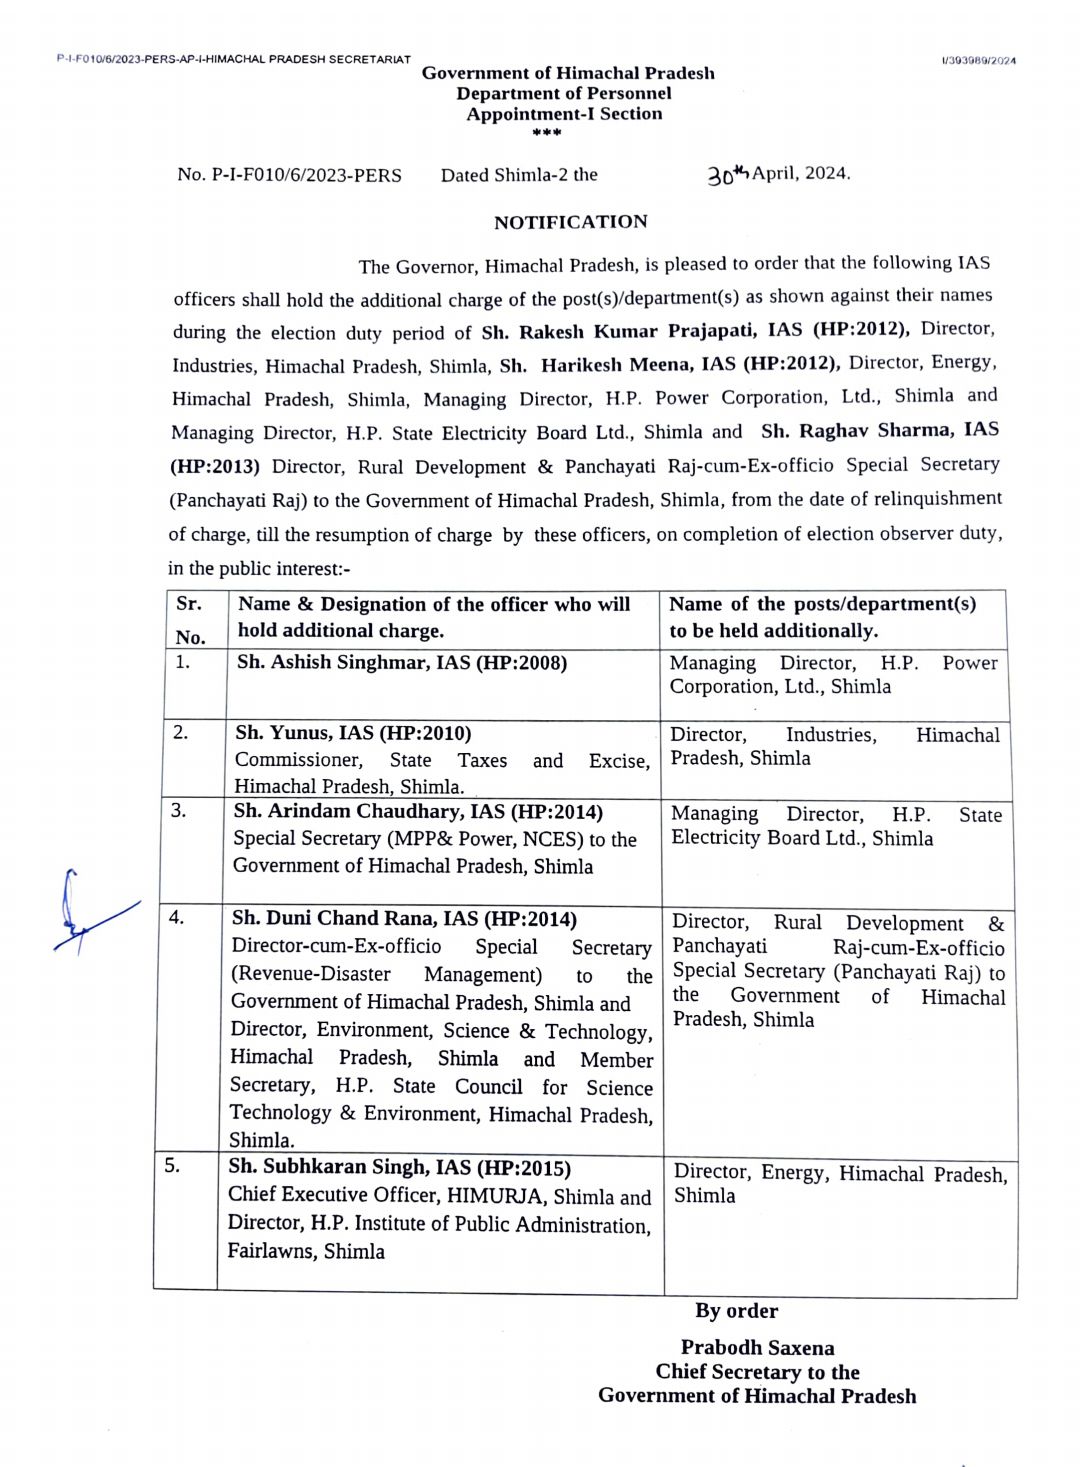 IAS Transfer 2024, IAS Transfer, Officers Transfer 2024, IAS Additional Charge 